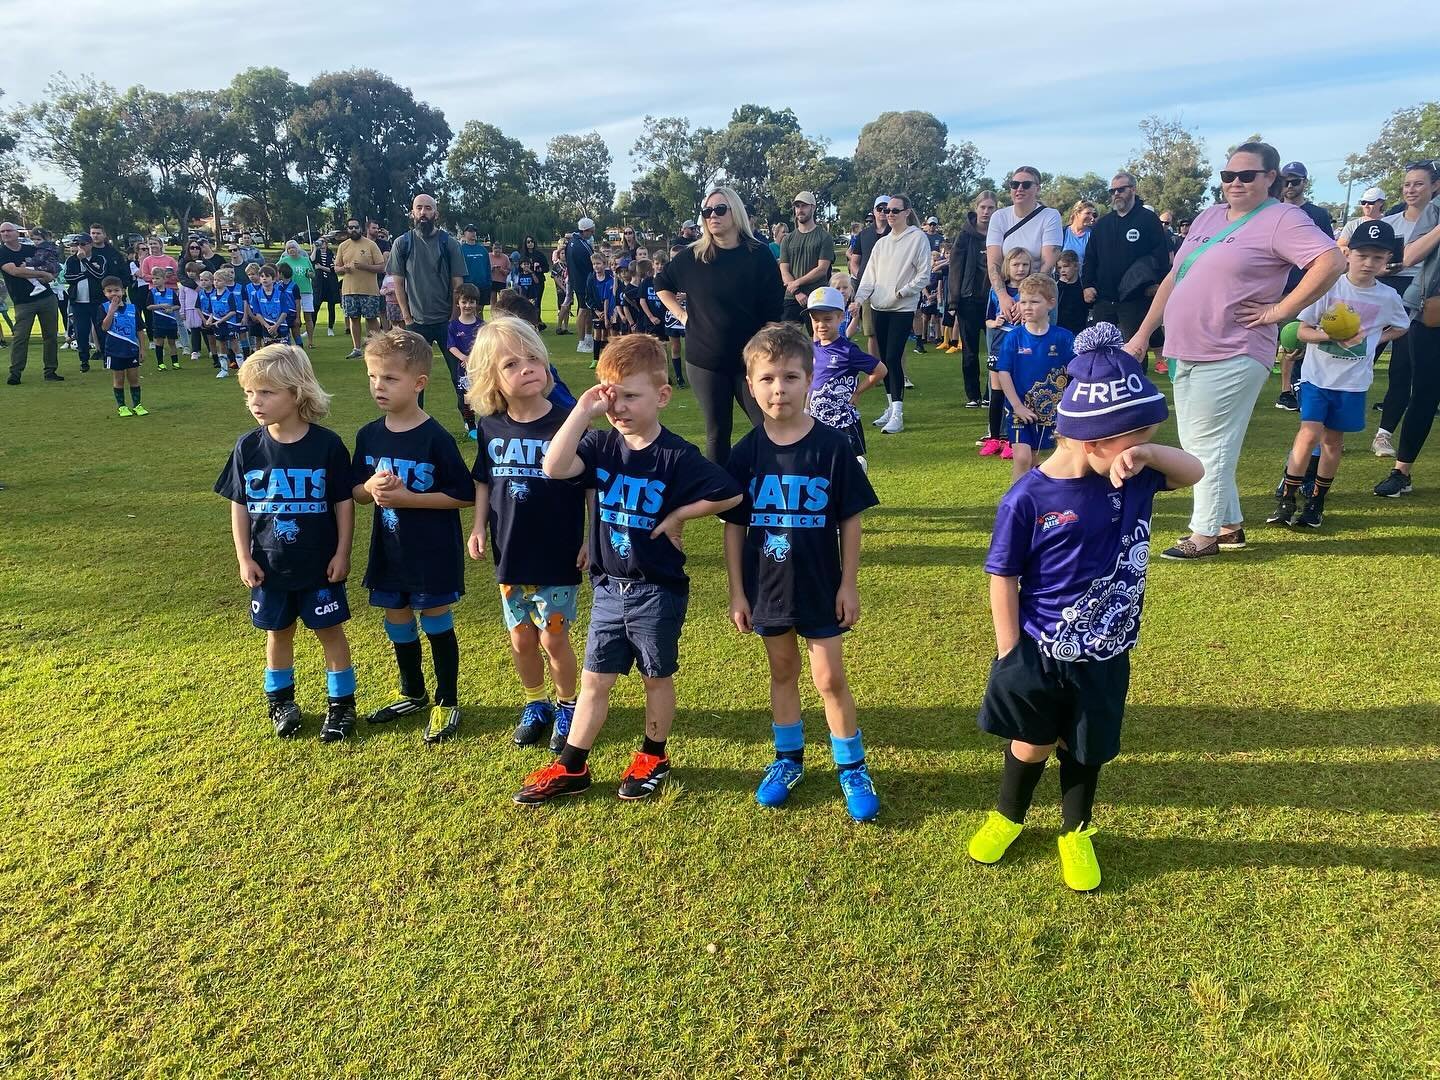 CJFC Auskick was a blast. The kids were showing their best footy skills and having fun. Sausage sizzle, bacon and egg burgers, coffees, hot chocolates and even an ice cream truck. What a great way to start the day with the family. 💙🖤💙